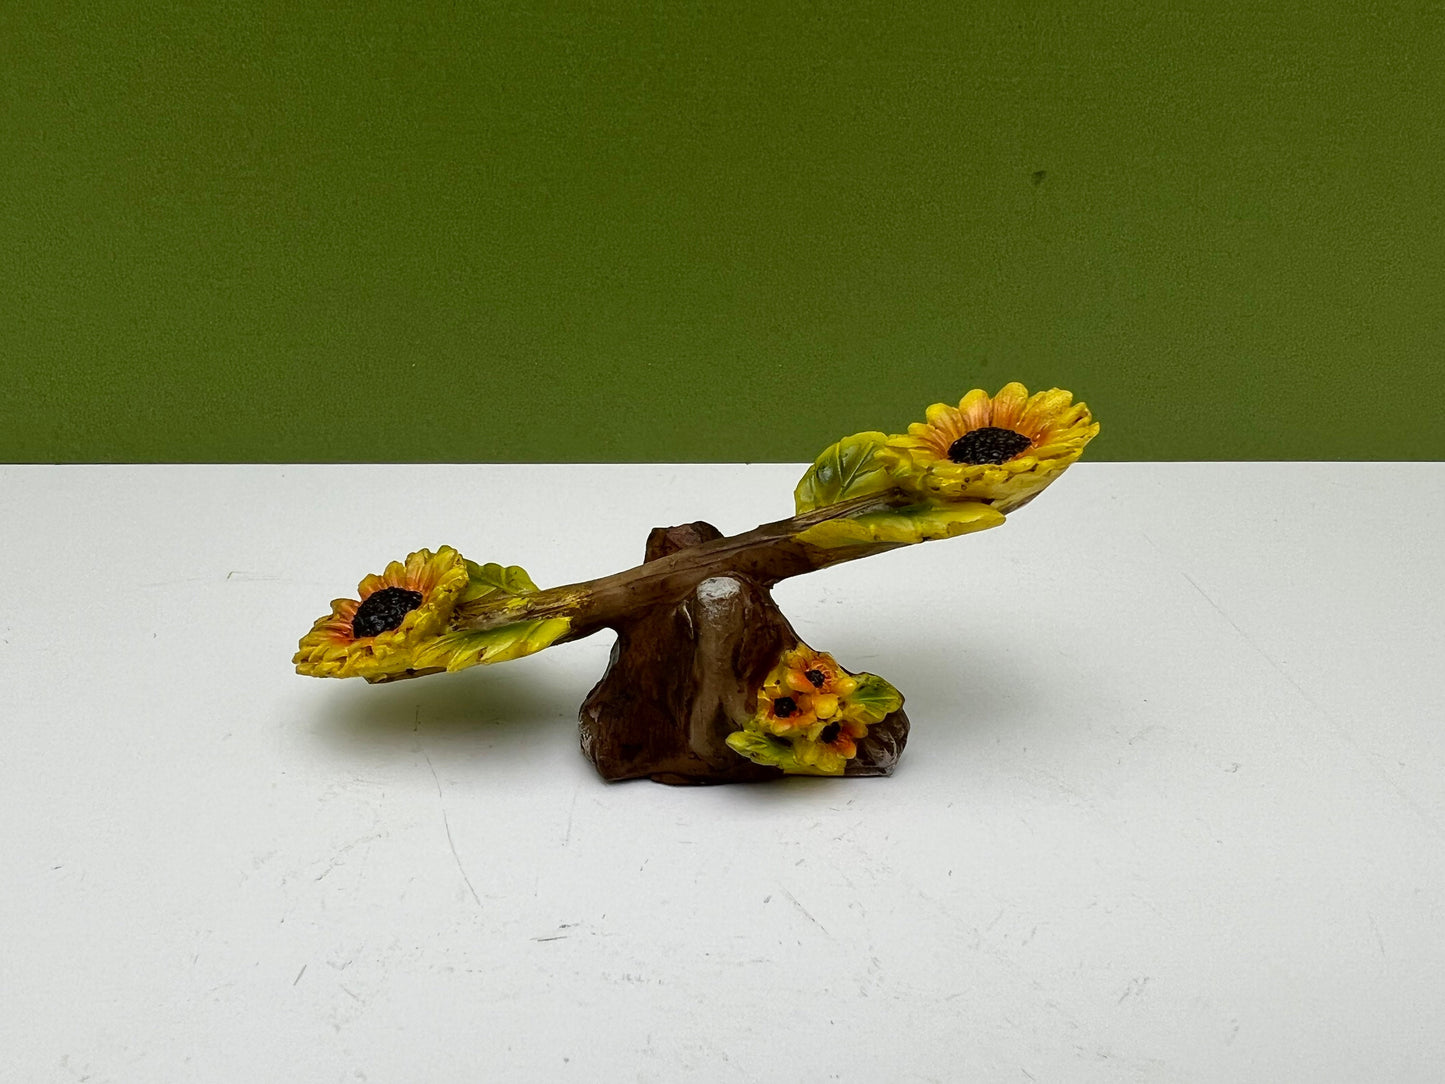 Sunflower See-Saw Teeter-Totter